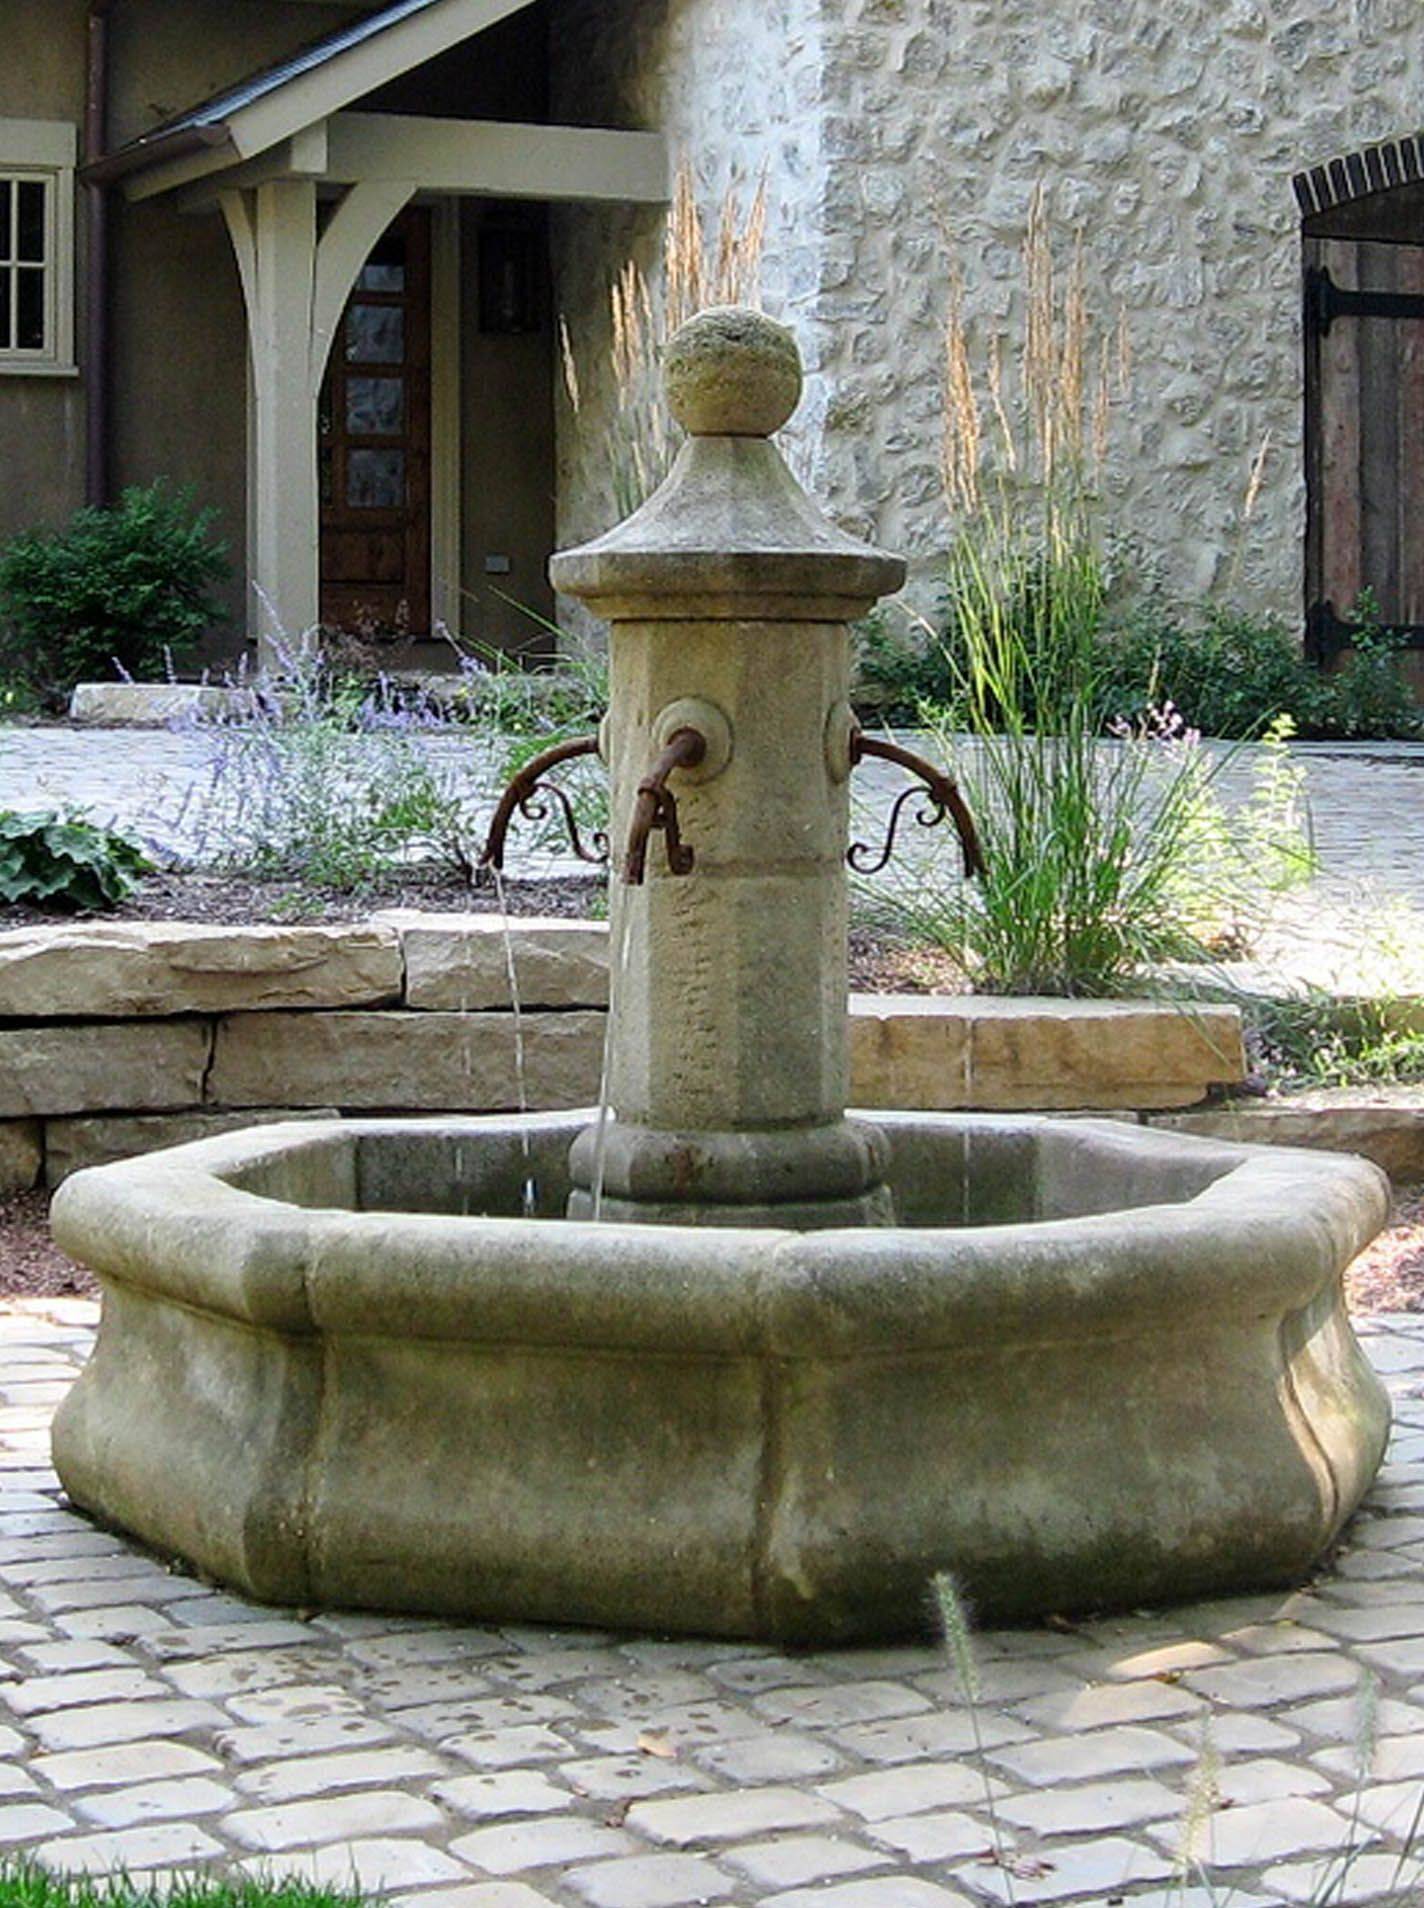 The Water Features